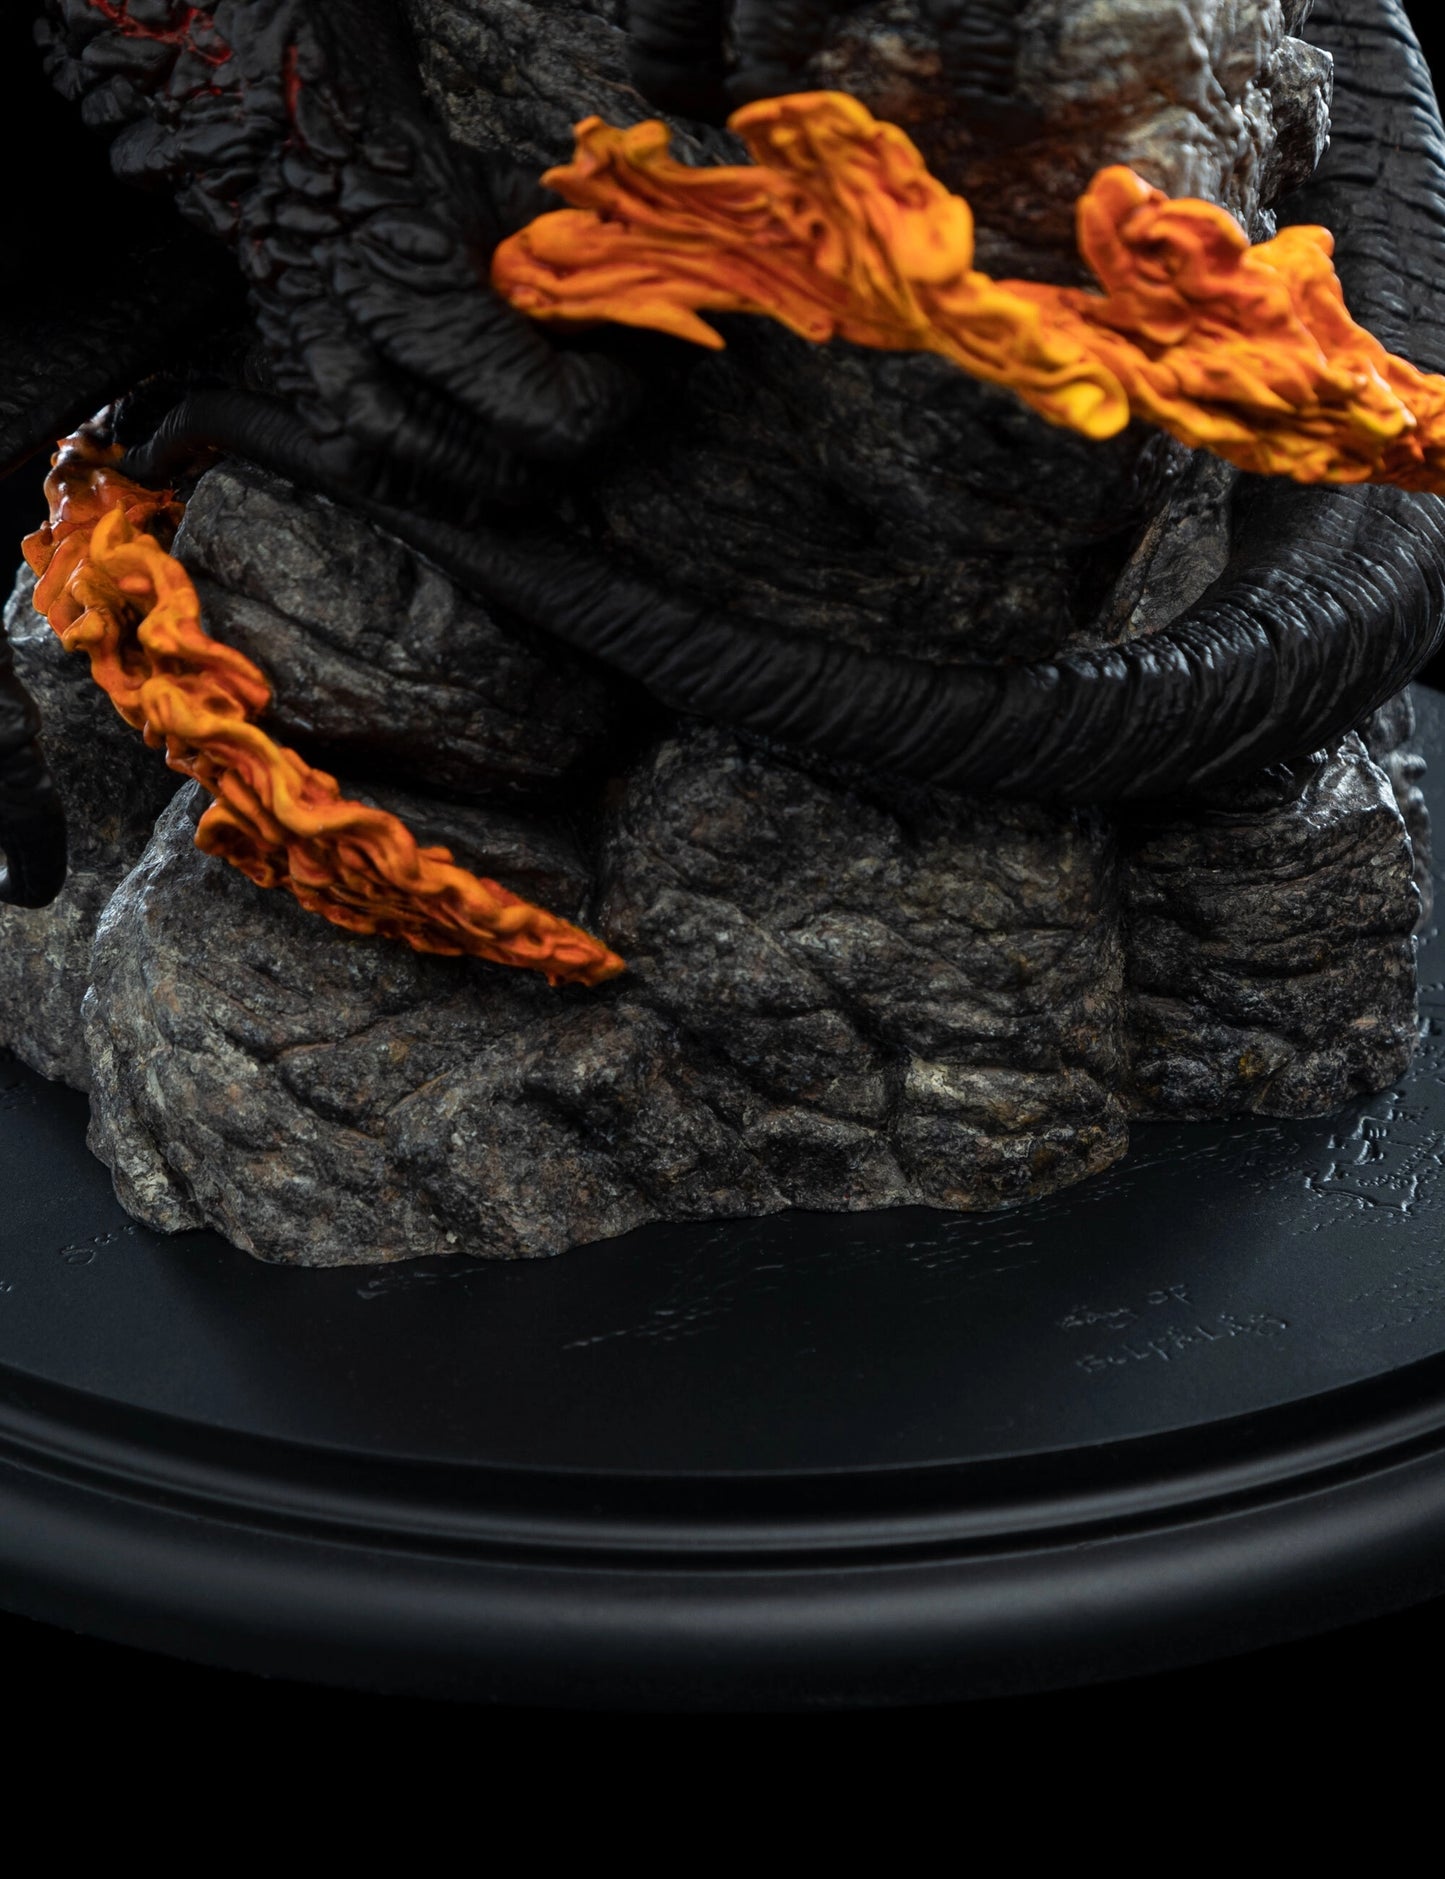 Balrog Lord of the Rings Statue by Weta Workshop